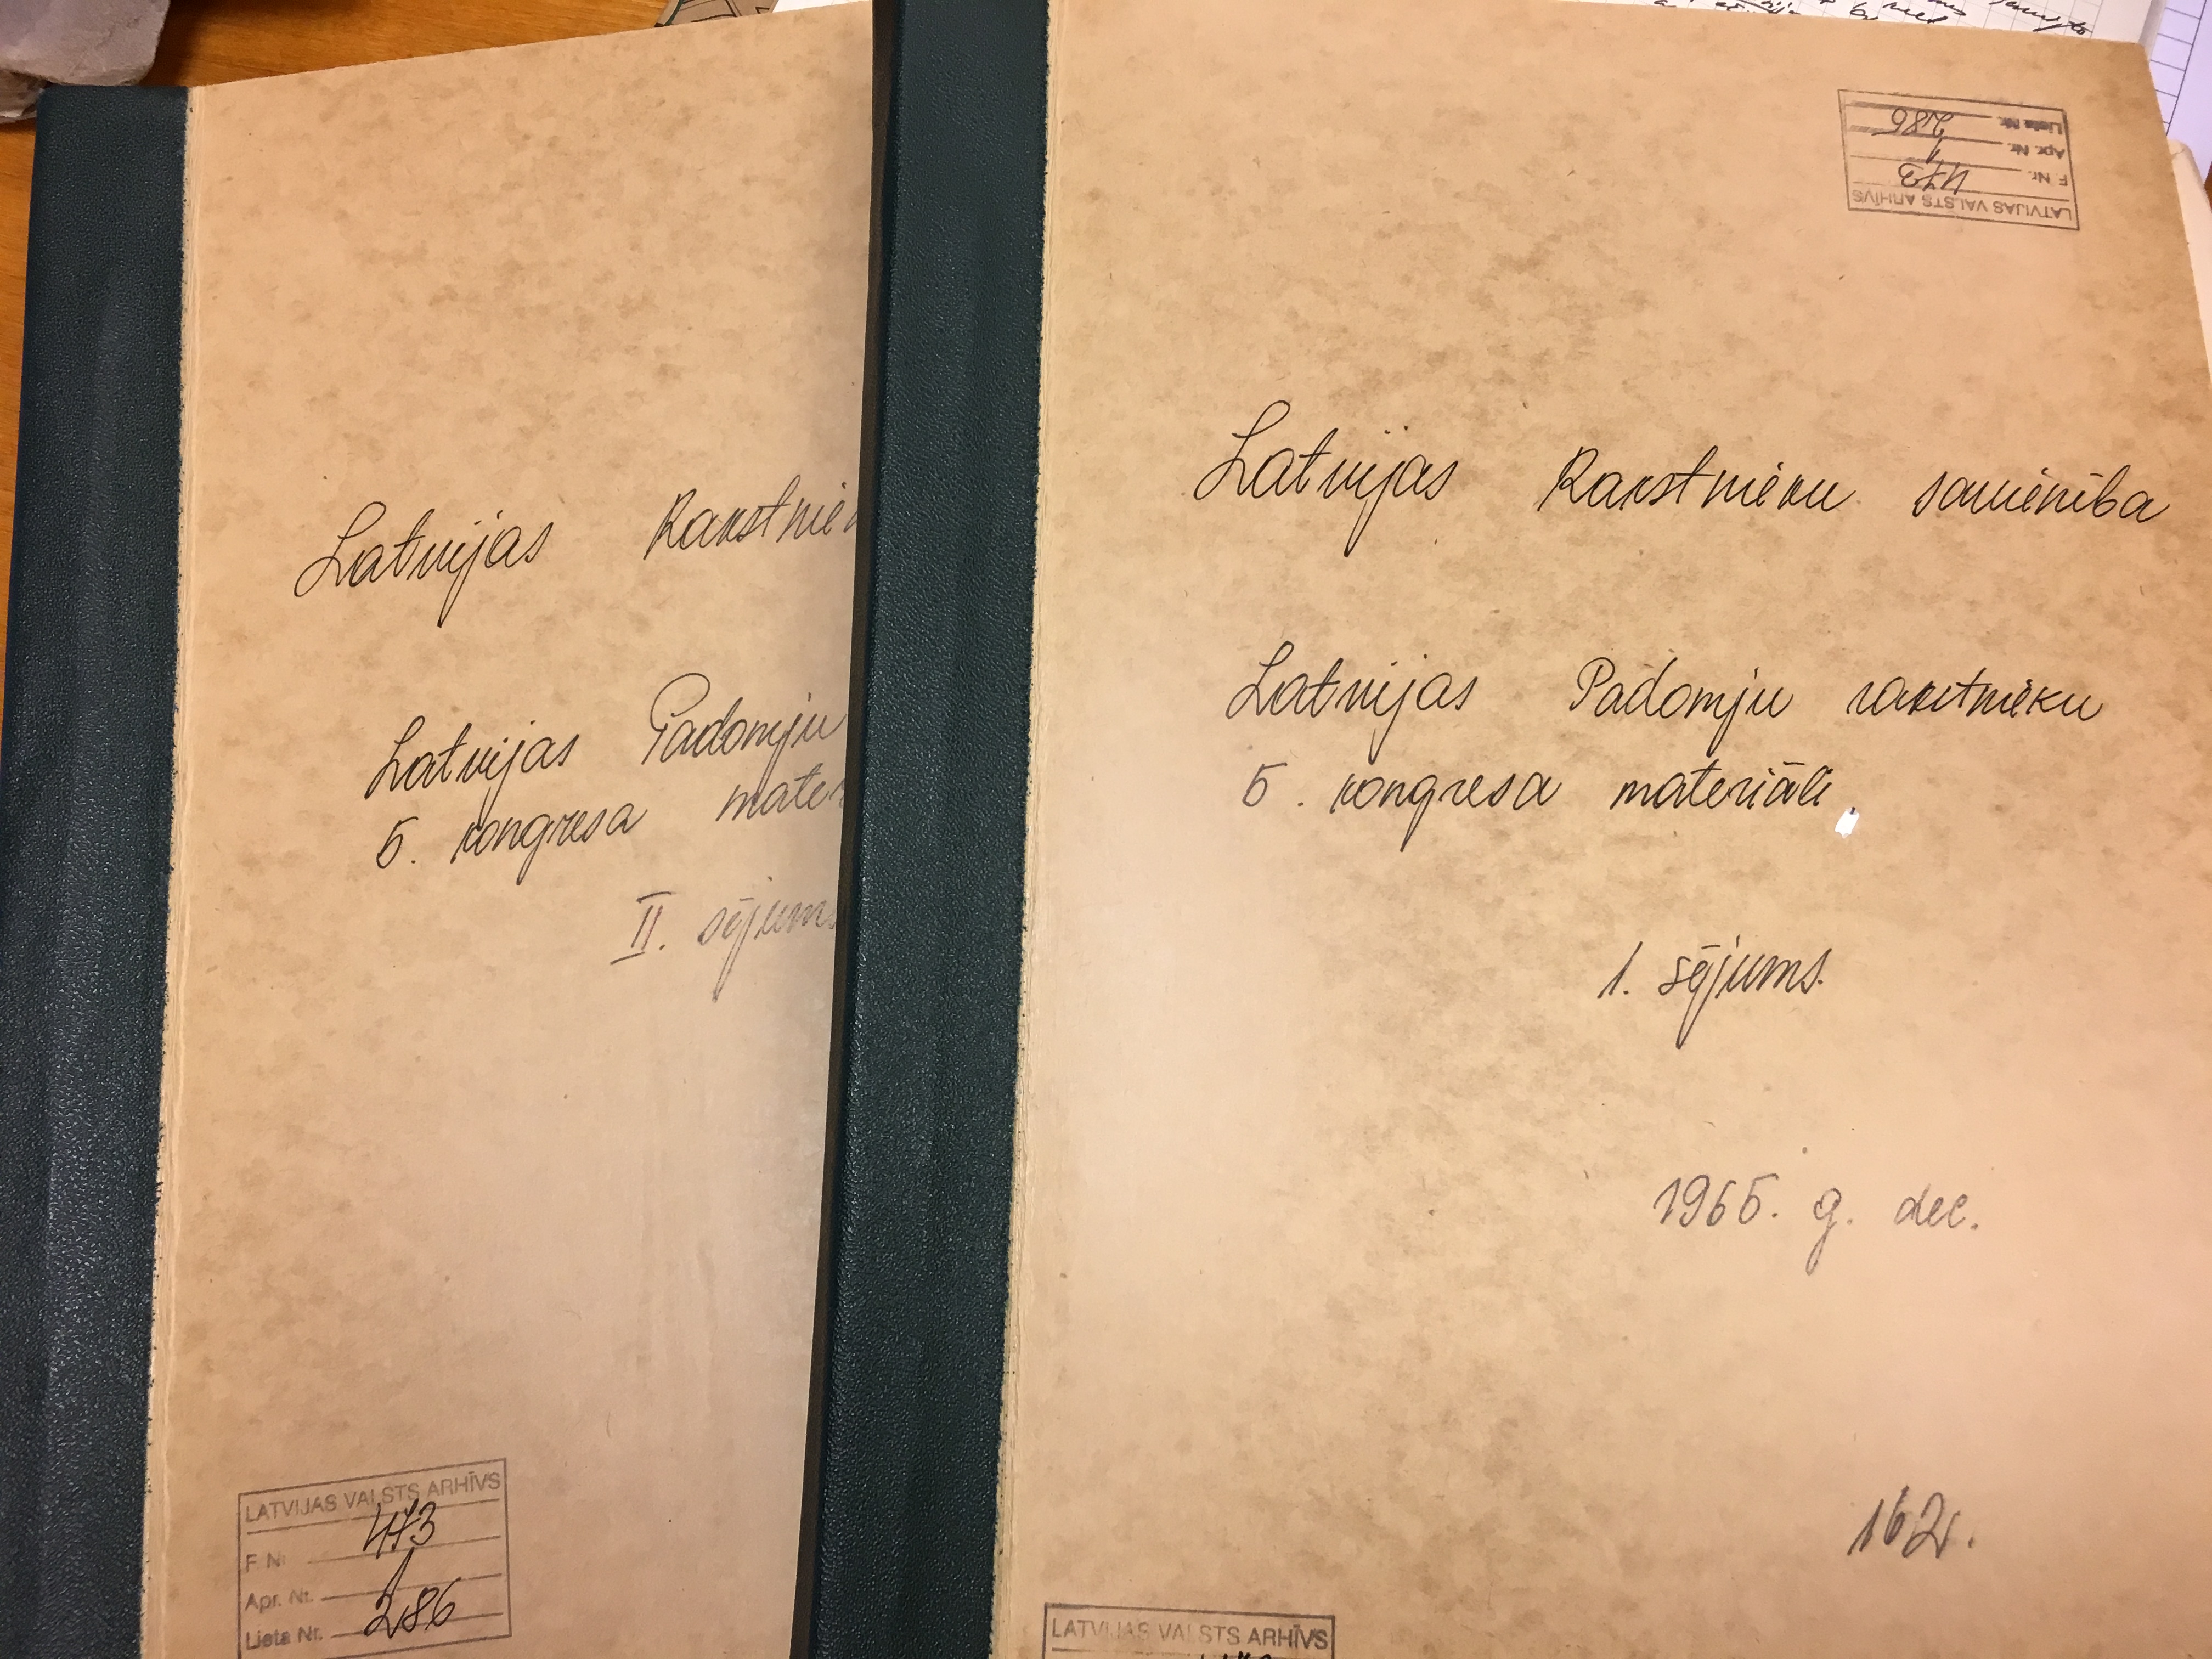 Files of the 5th Congress of the Latvian Soviet Writers' Union in December 1965